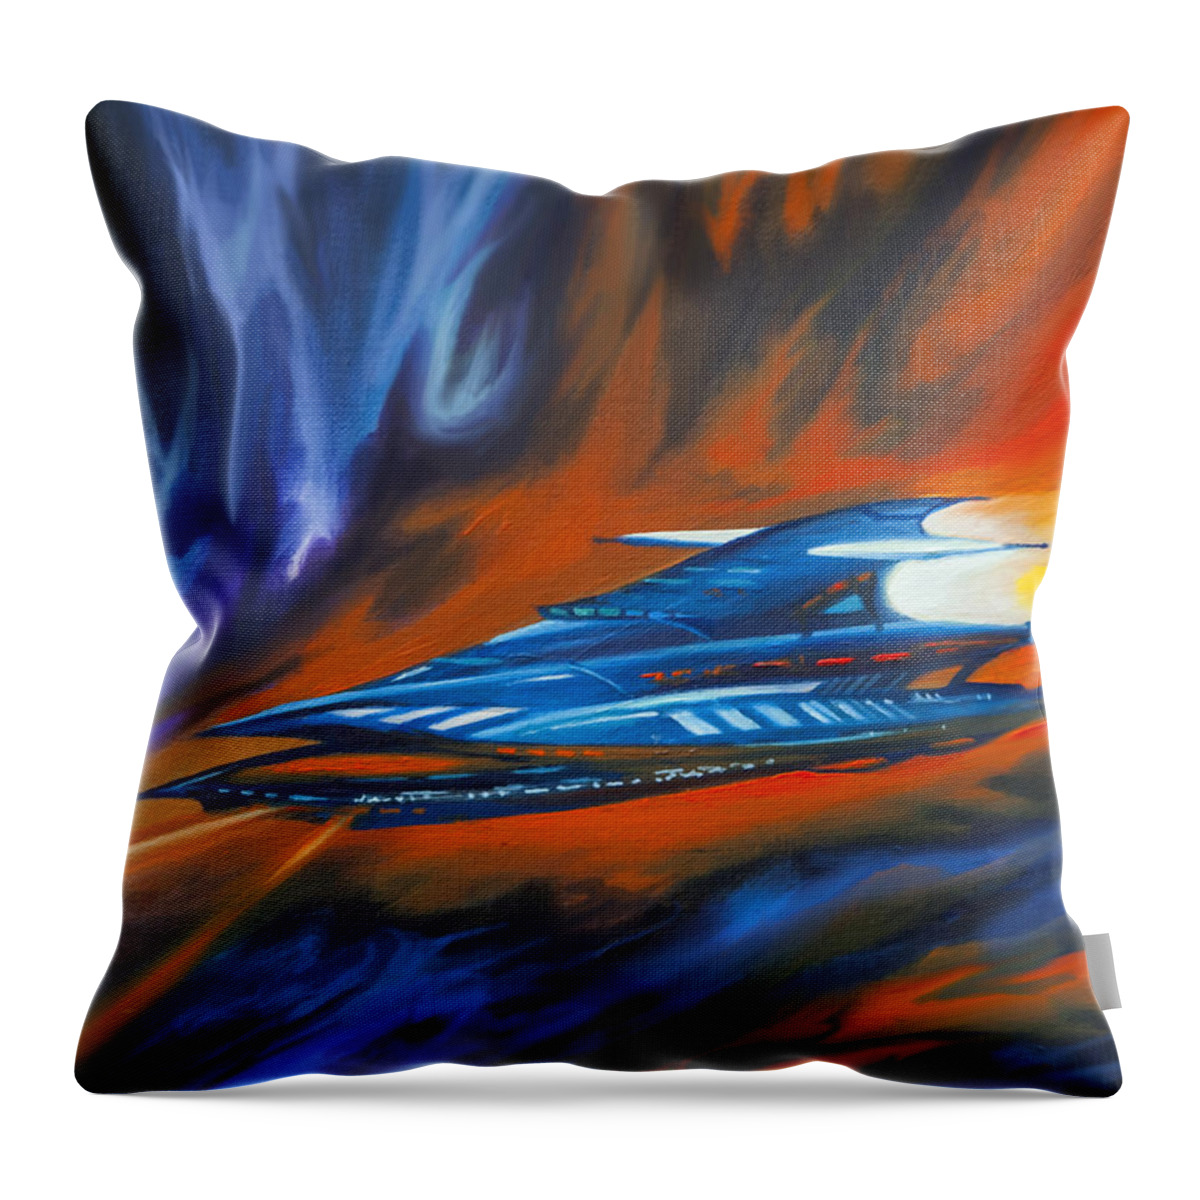  Jameshillgallery.com Throw Pillow featuring the painting Star Cruiser by James Hill